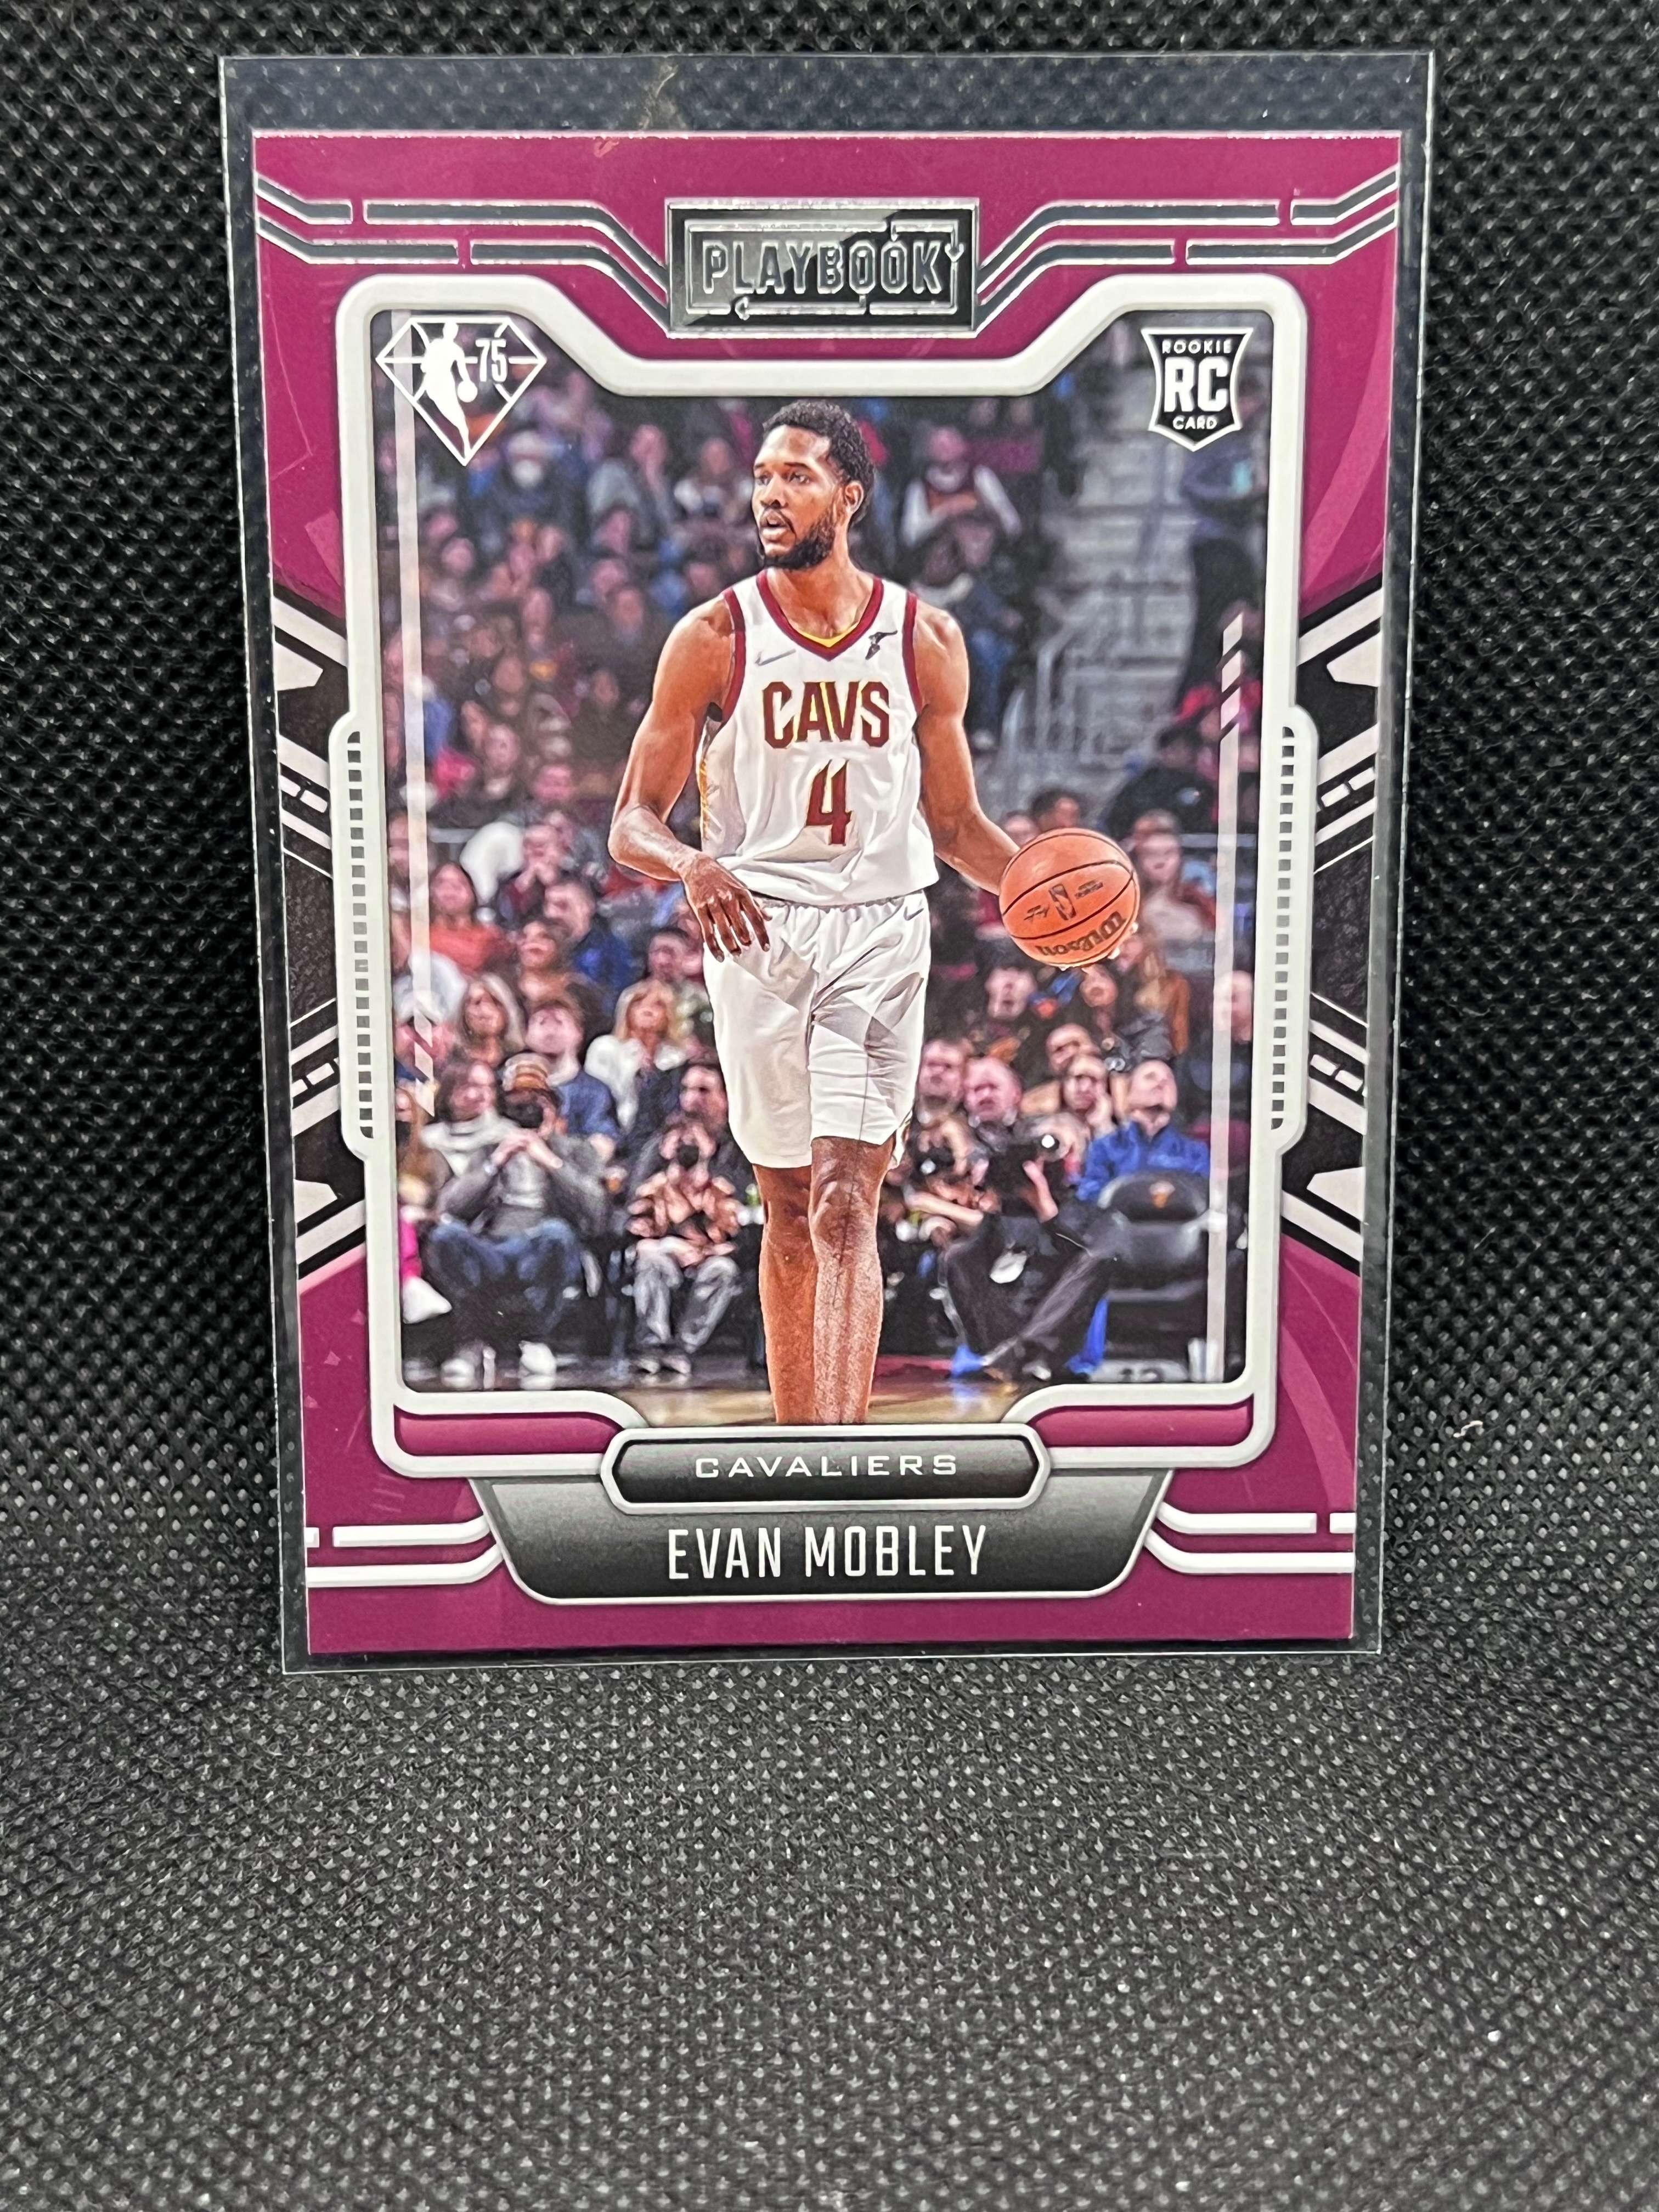 Evan Mobley 2021-22 Chronicles Playbook Rookie #287 Cavs | eBay